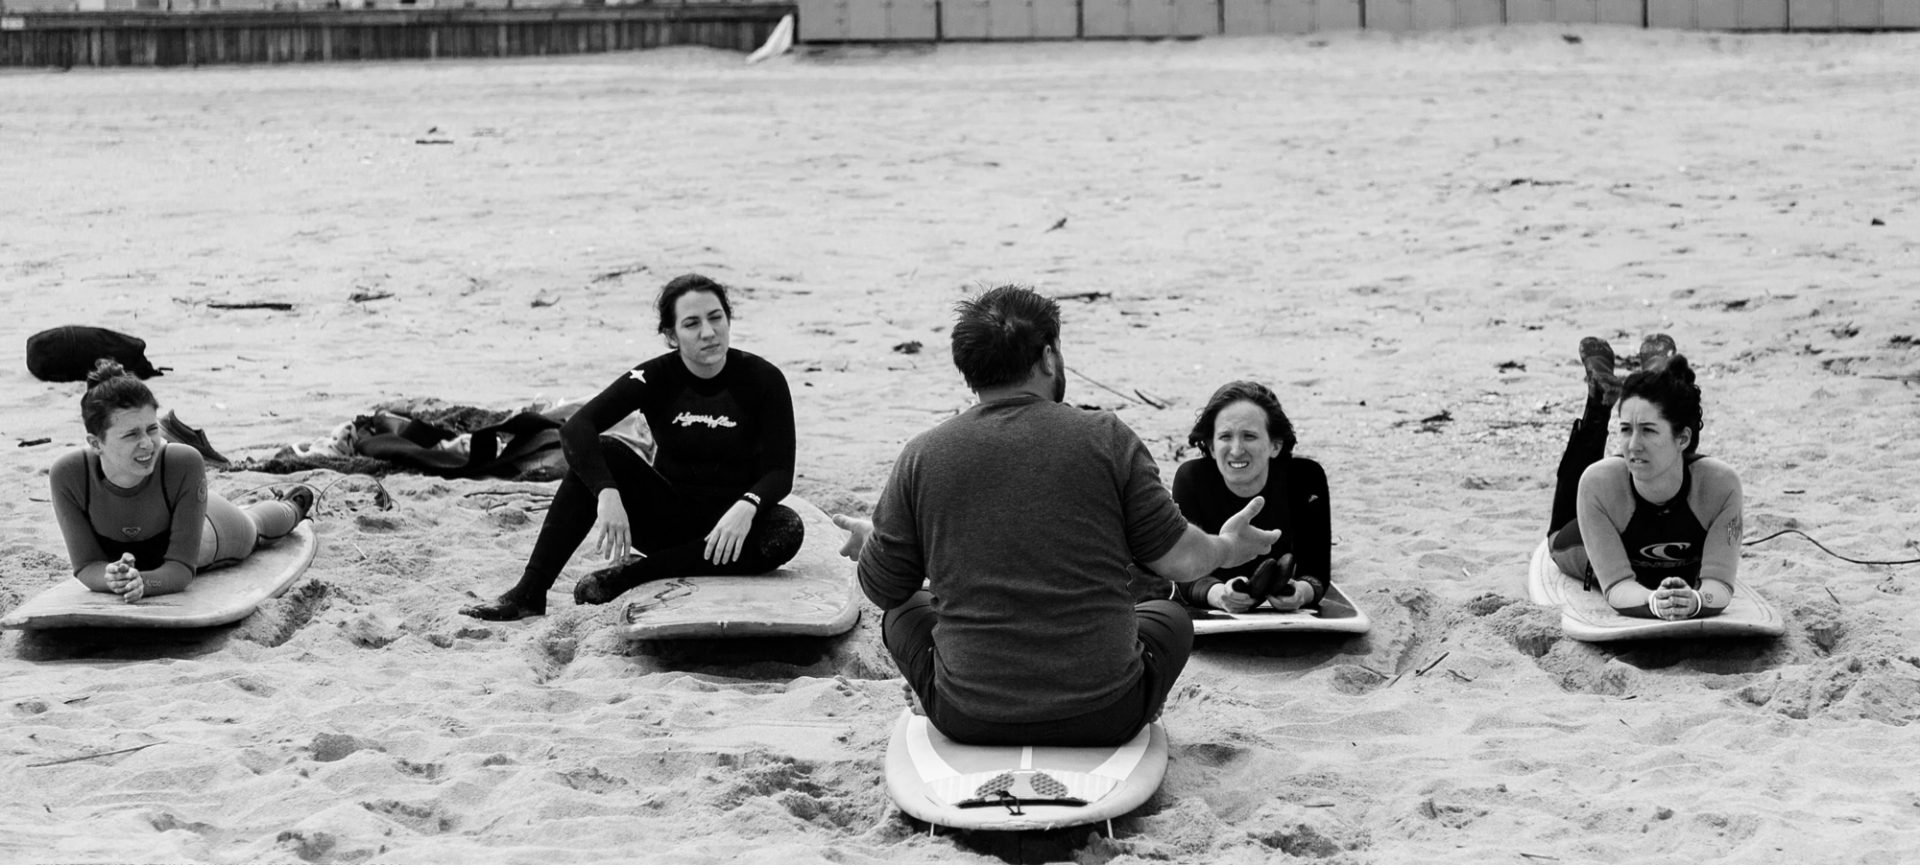 philly_surf_crew-dune-grass-planting-family02